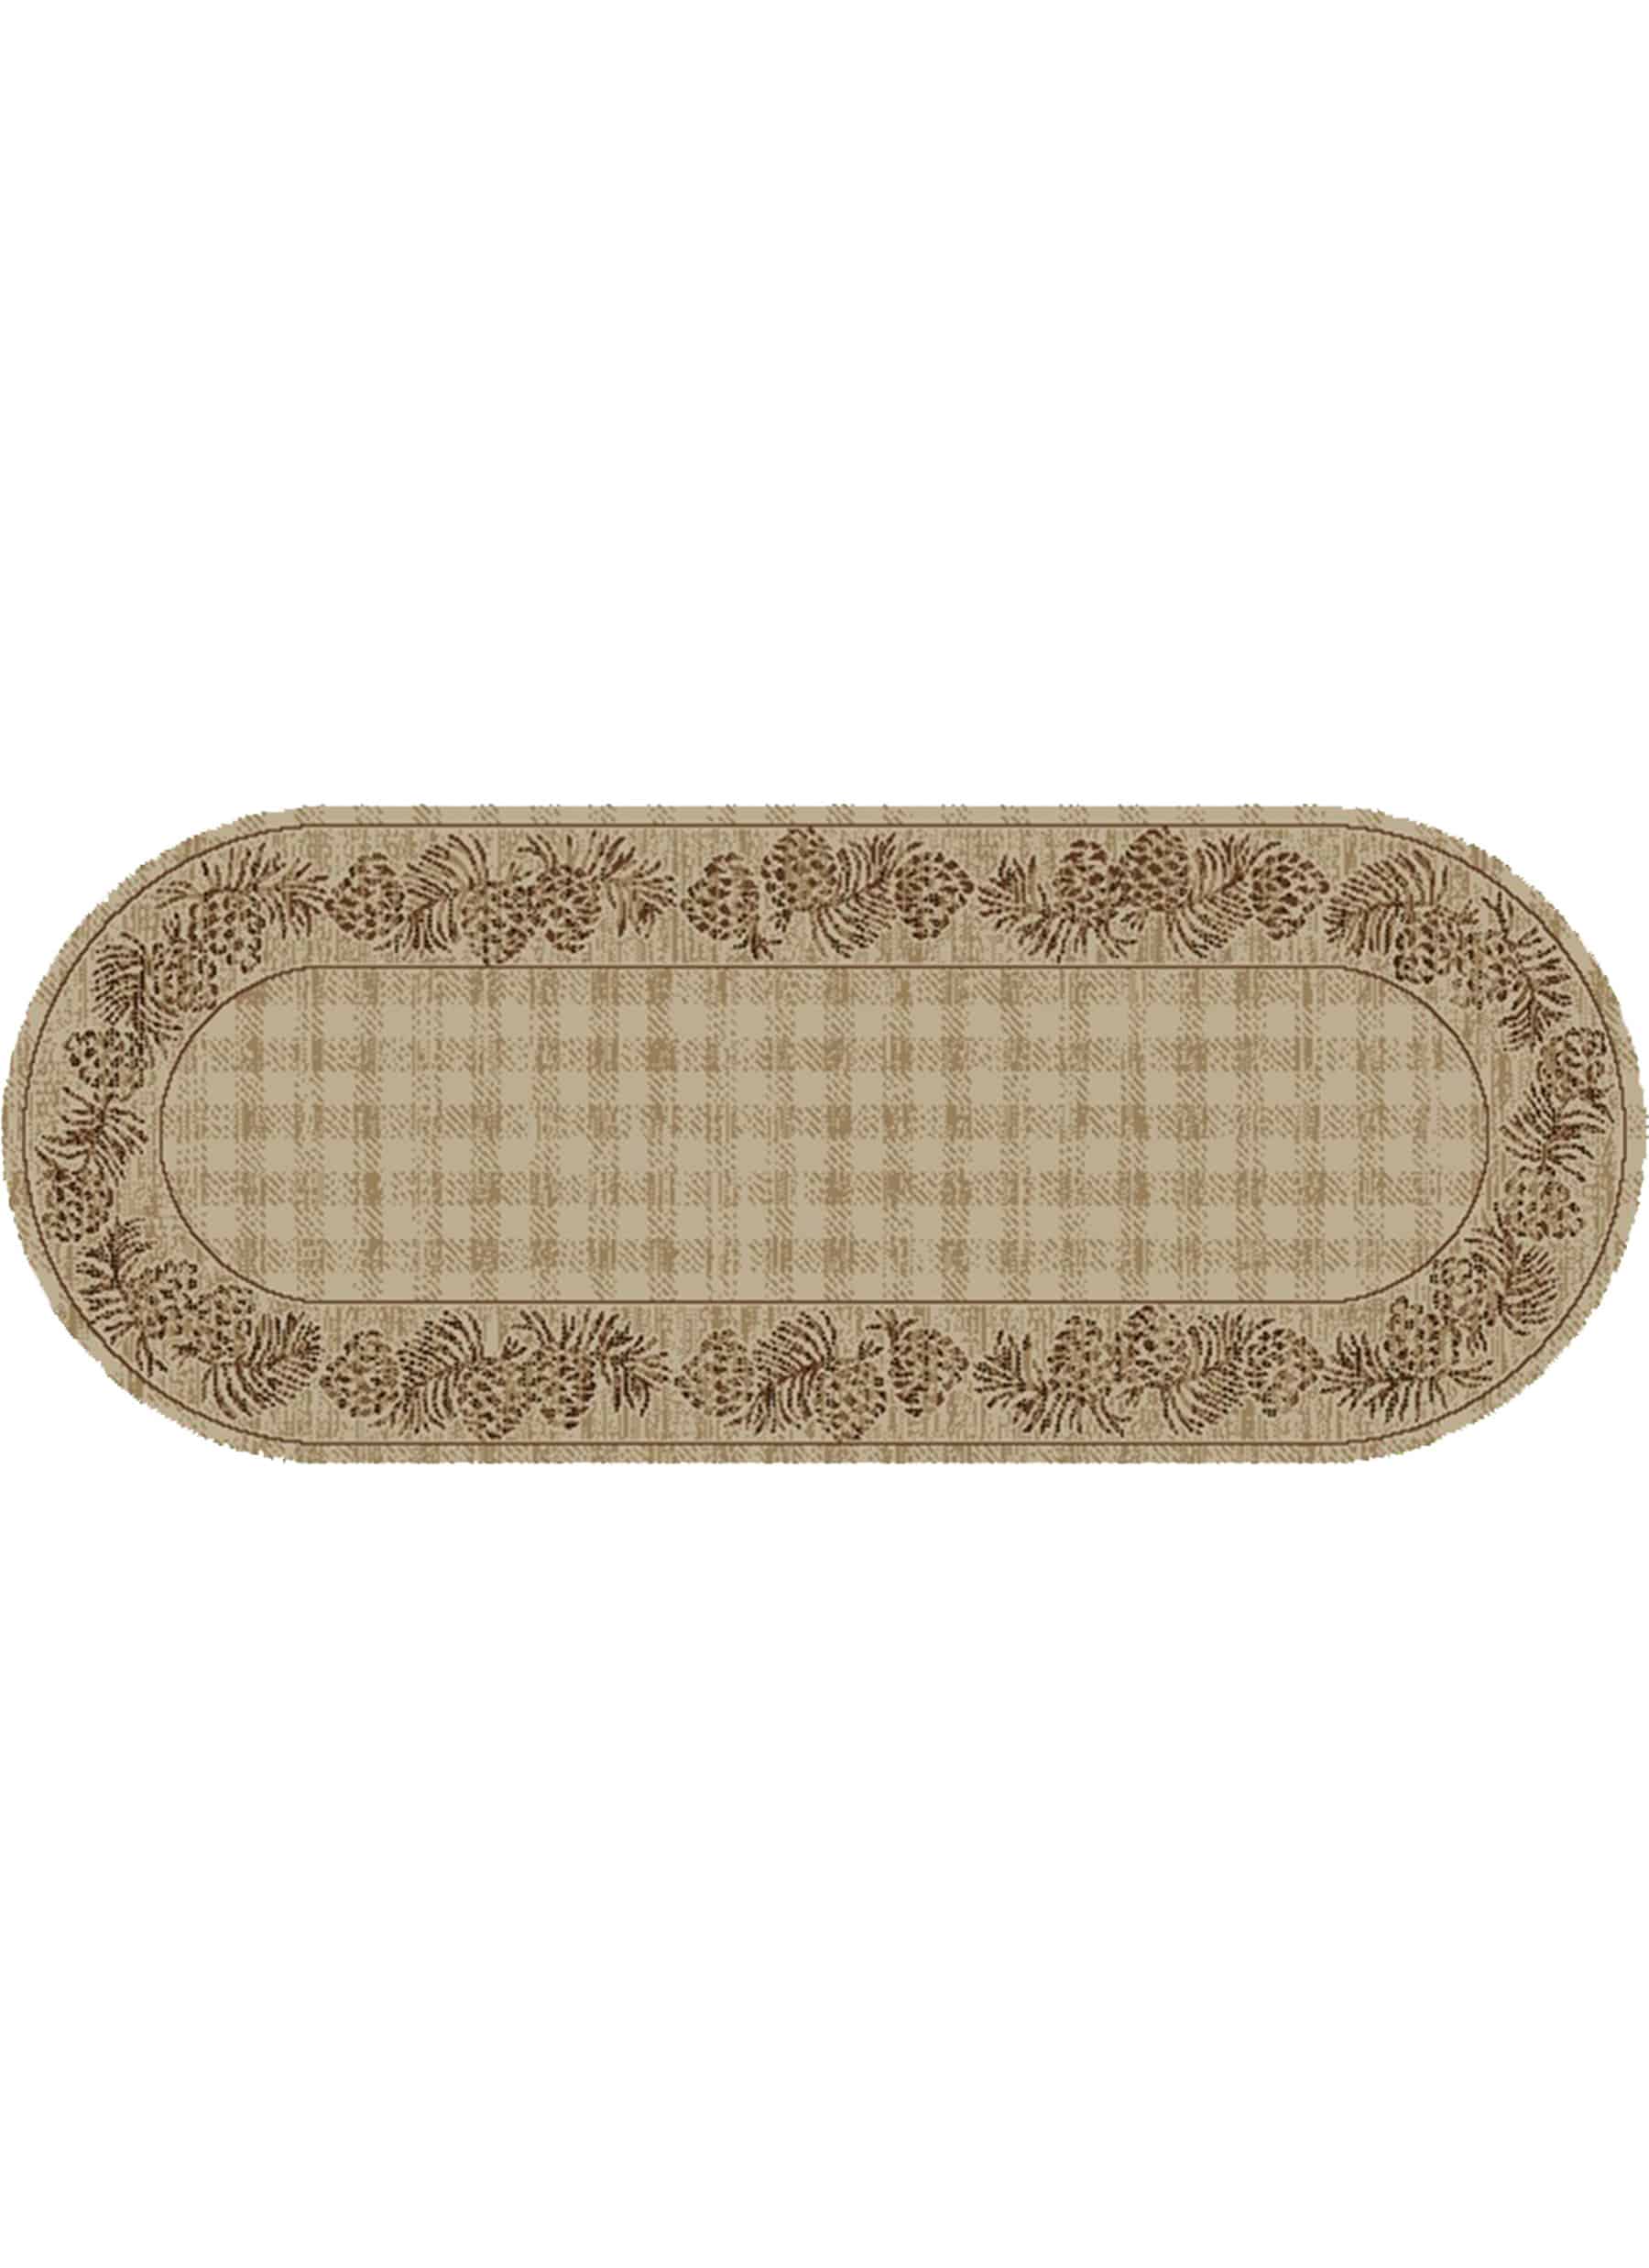 Oval Long branch. mayberry rug